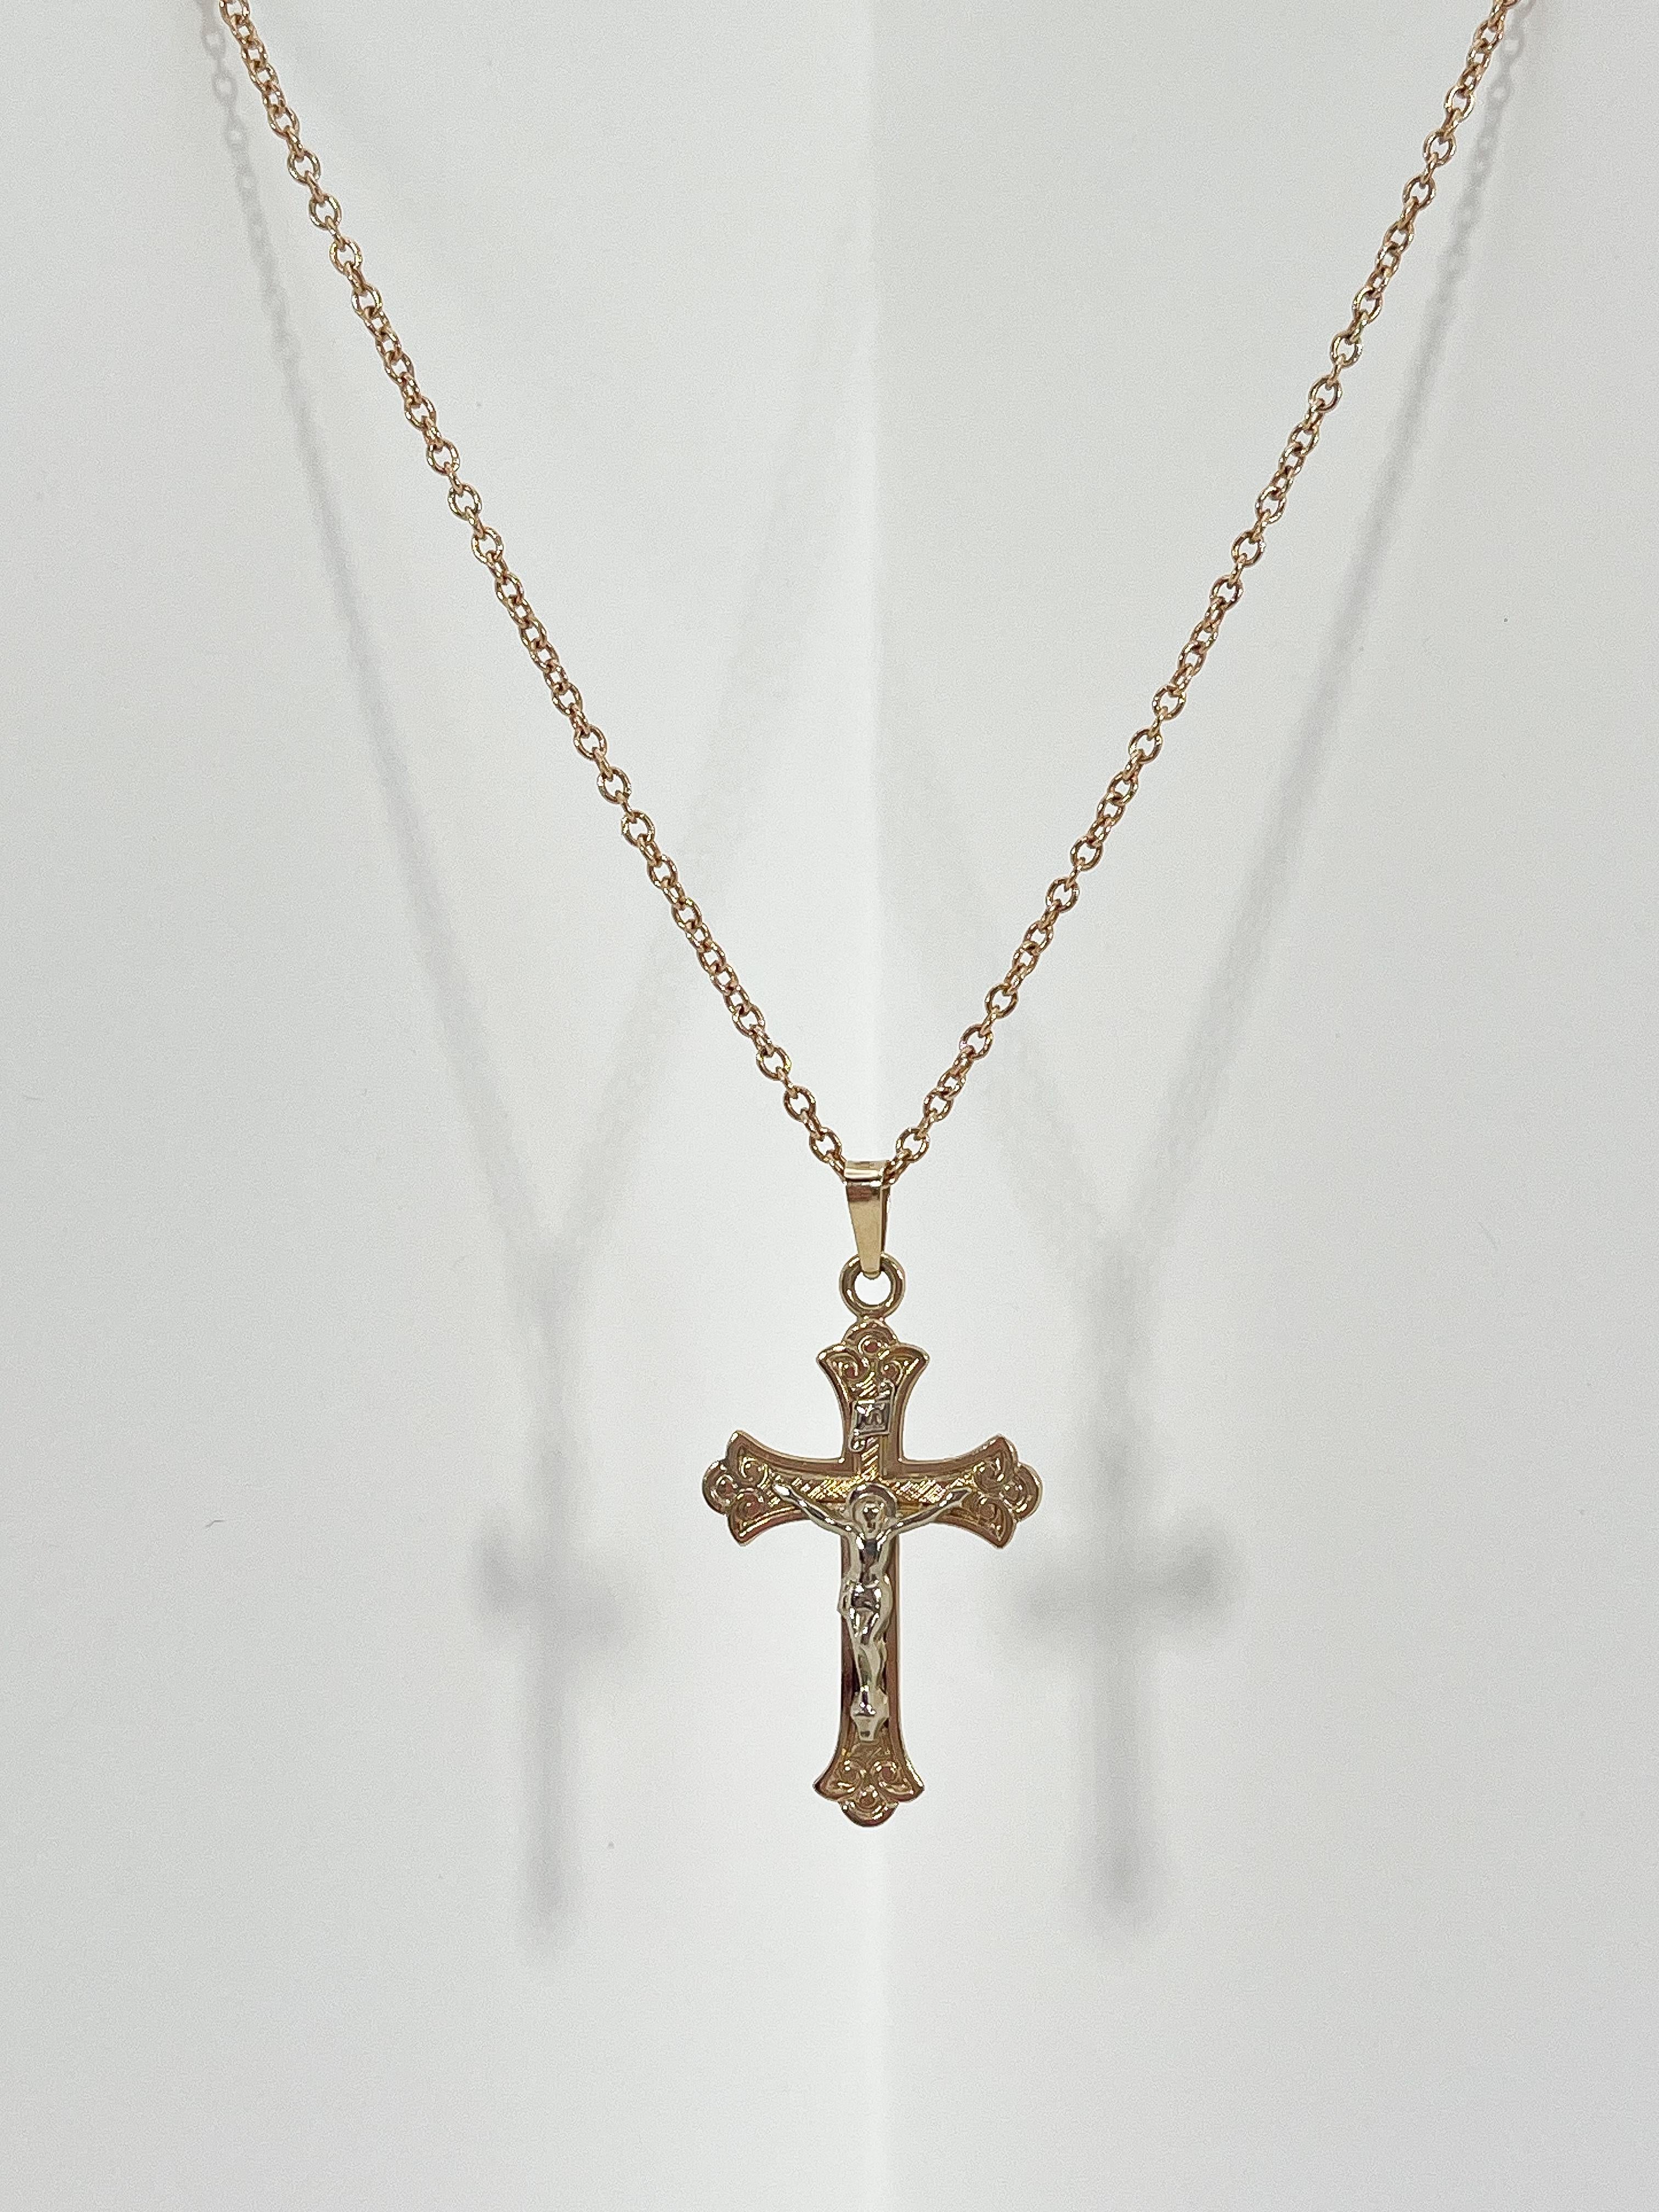 14k yellow gold crucifix pendant necklace. Pendant measures to be 25.5mm x 17.5mm, comes on a 14.5 inch diamond cut cable chain, has a spring ring to open and close necklace, and necklace has a total weight of 3.6 grams.